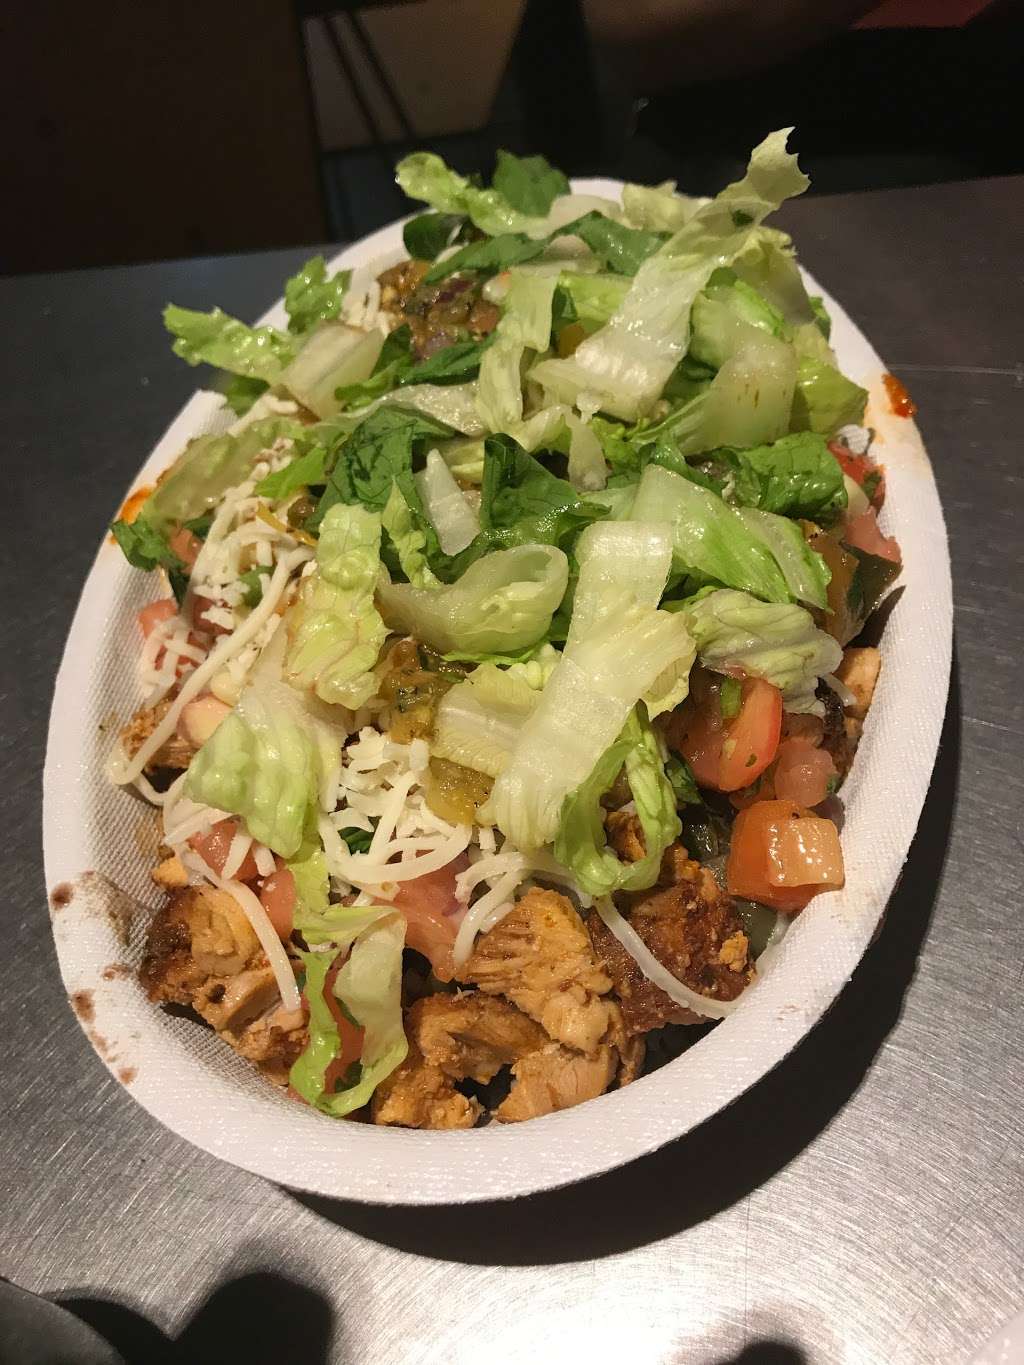 Chipotle Mexican Grill | 12 Lawrence St, Dobbs Ferry, NY 10522, USA | Phone: (914) 693-8135